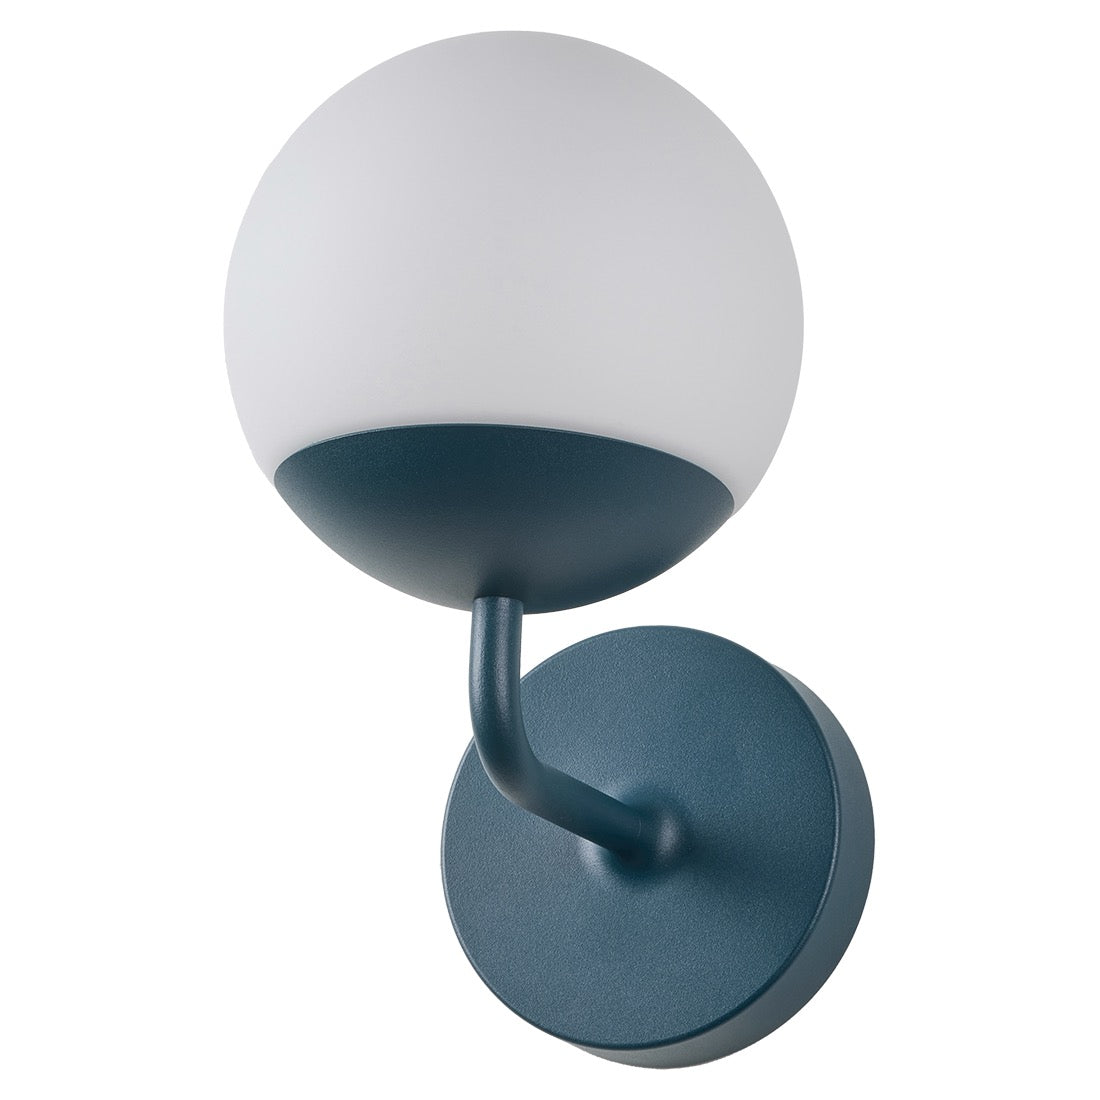 Fermob Mooon! Wall Lamp, designed by Tristan Lohner, in Acapulco Blue